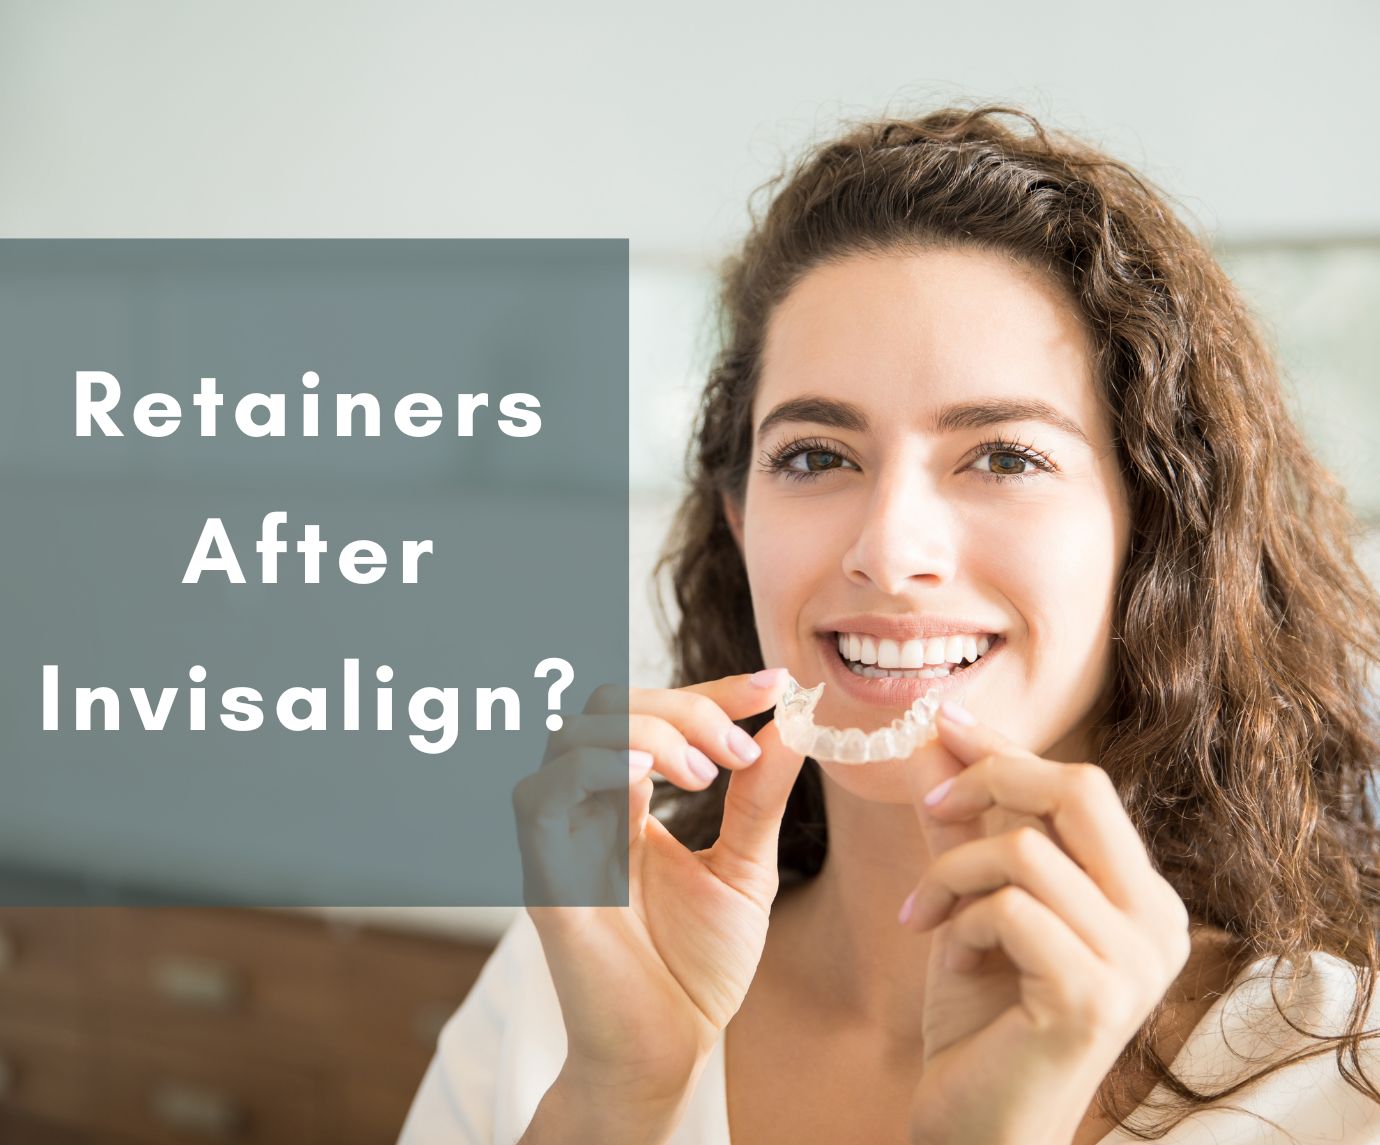 The Complete Guide To Taking Care of Invisalign Retainers